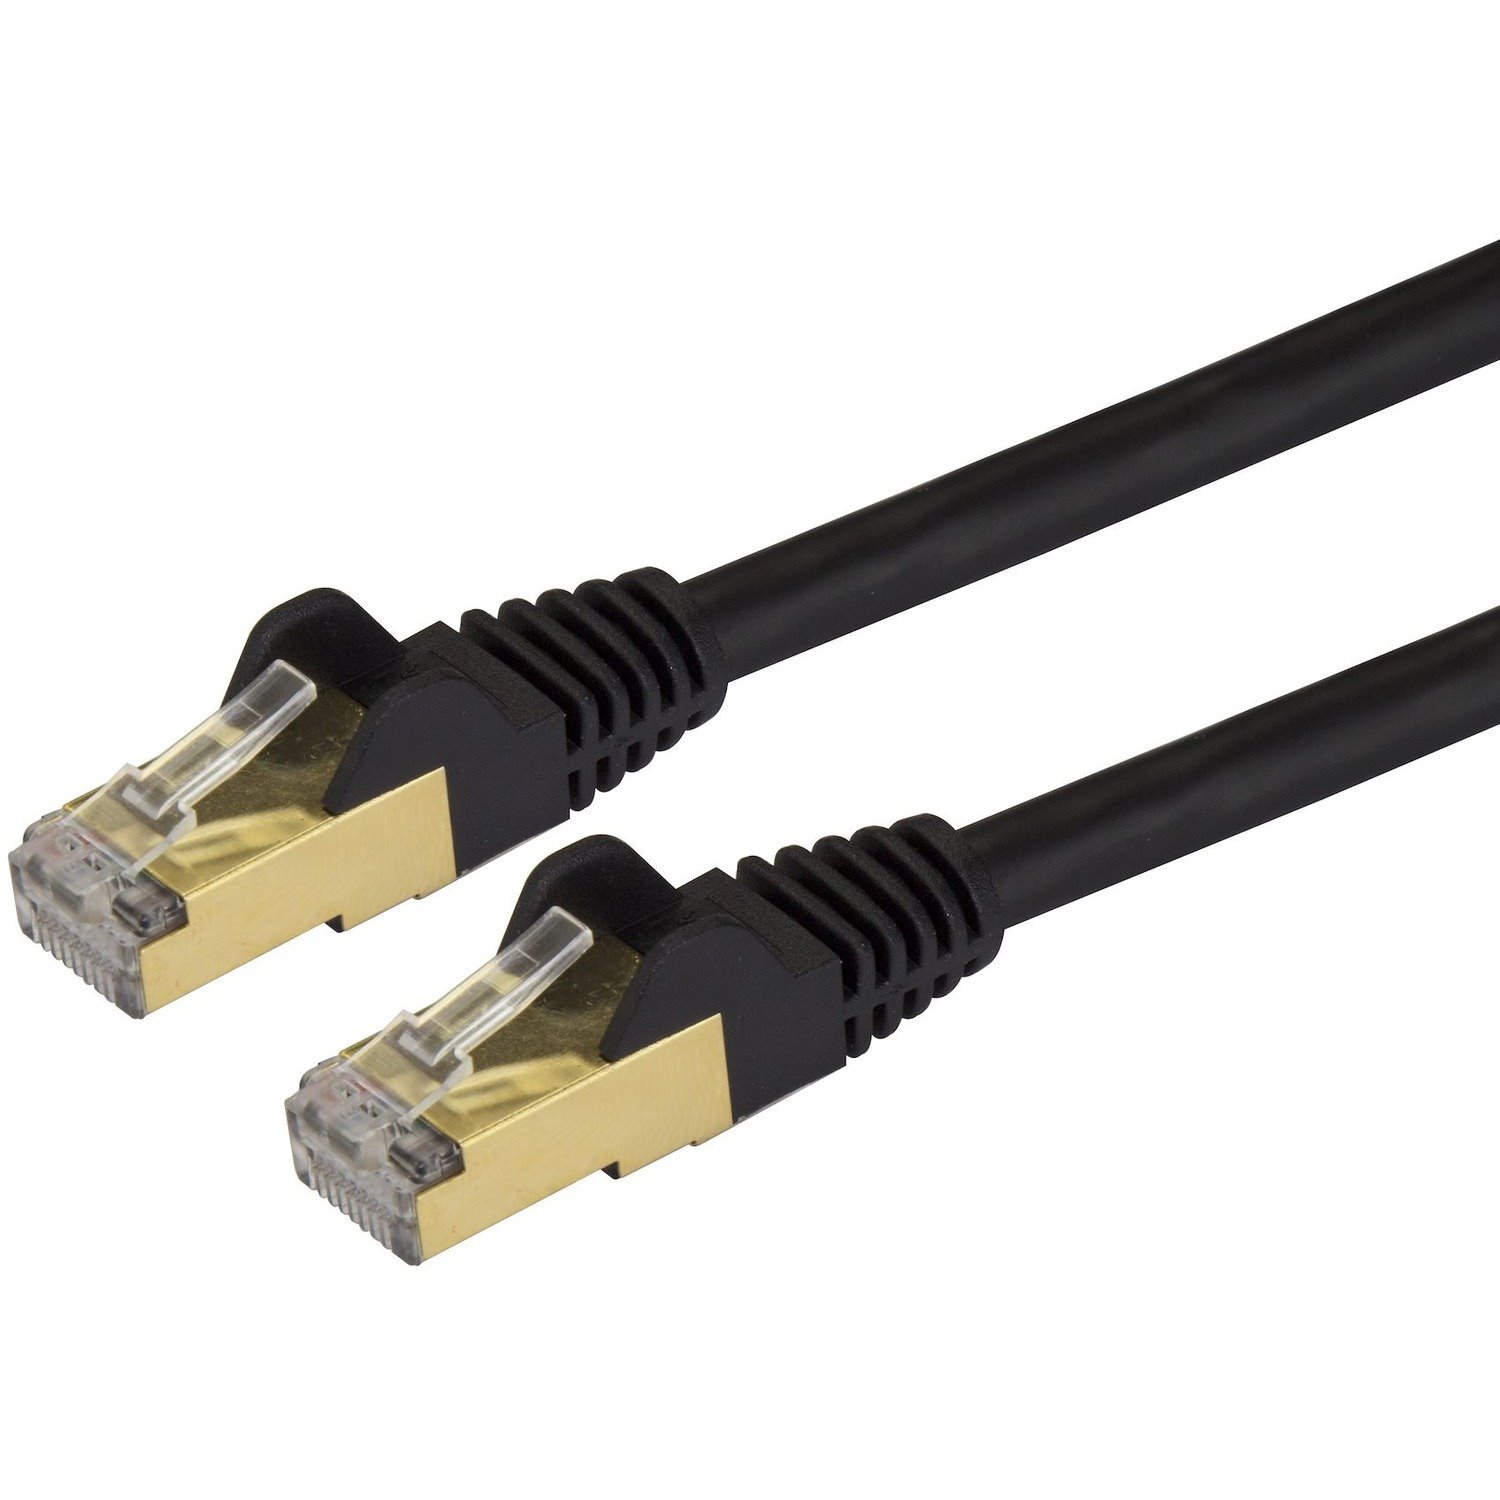 StarTech.com 30.48 cm Category 6a Network Cable for Docking Station, Network Device, Notebook, Desktop Computer, Hub, Switch, Router, Print Server, Patch Panel, PoE-enabled Device, VoIP Device - 1